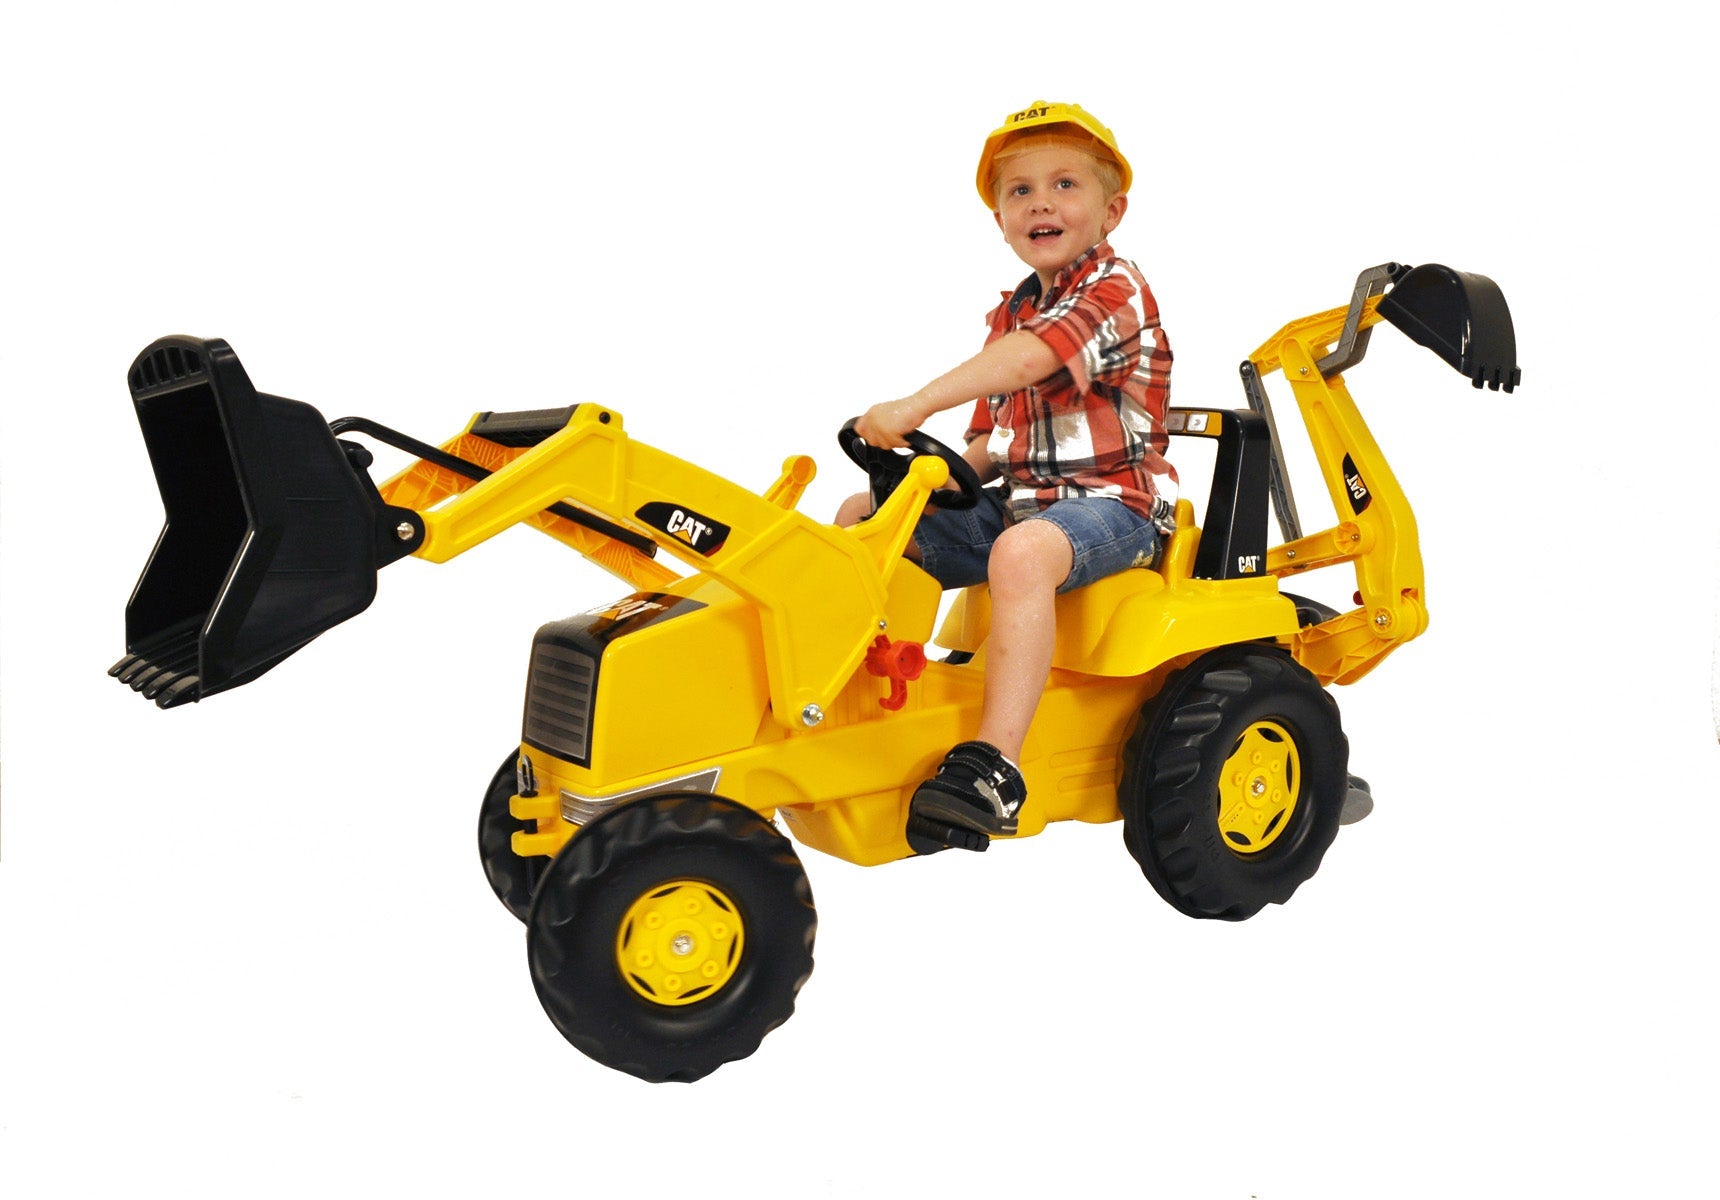 Kettler USA Rolly CAT Caterpillar Front Loader W/Backhoe Ride-On Toy, 813001 - Upzy.com